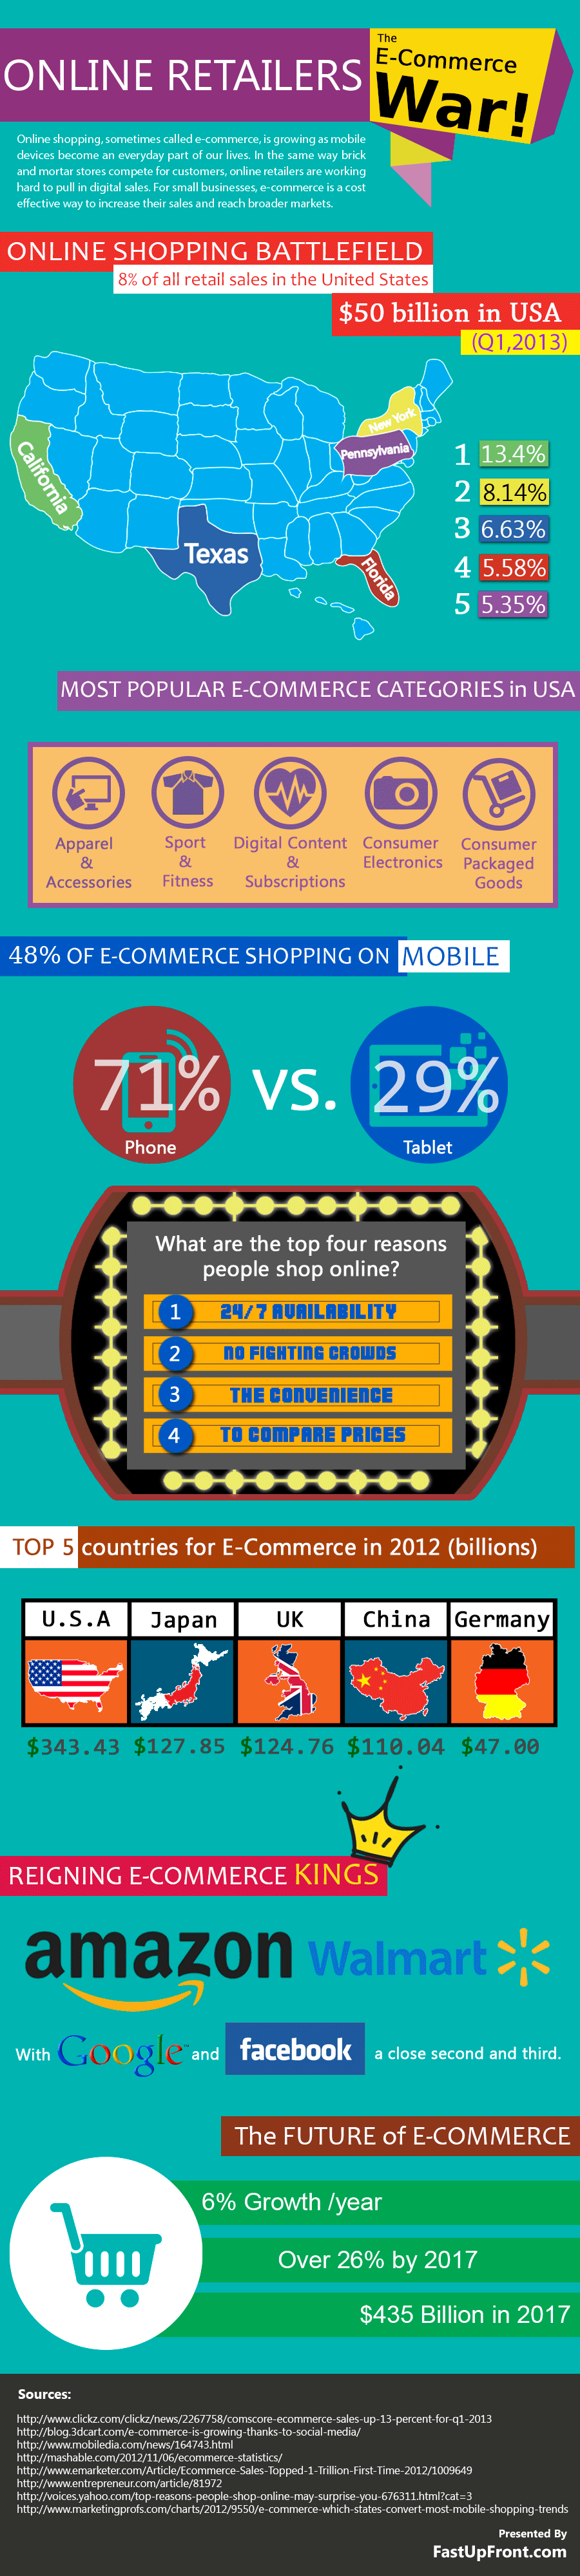 Online Retailers: The E-Commerce War [Infographic]